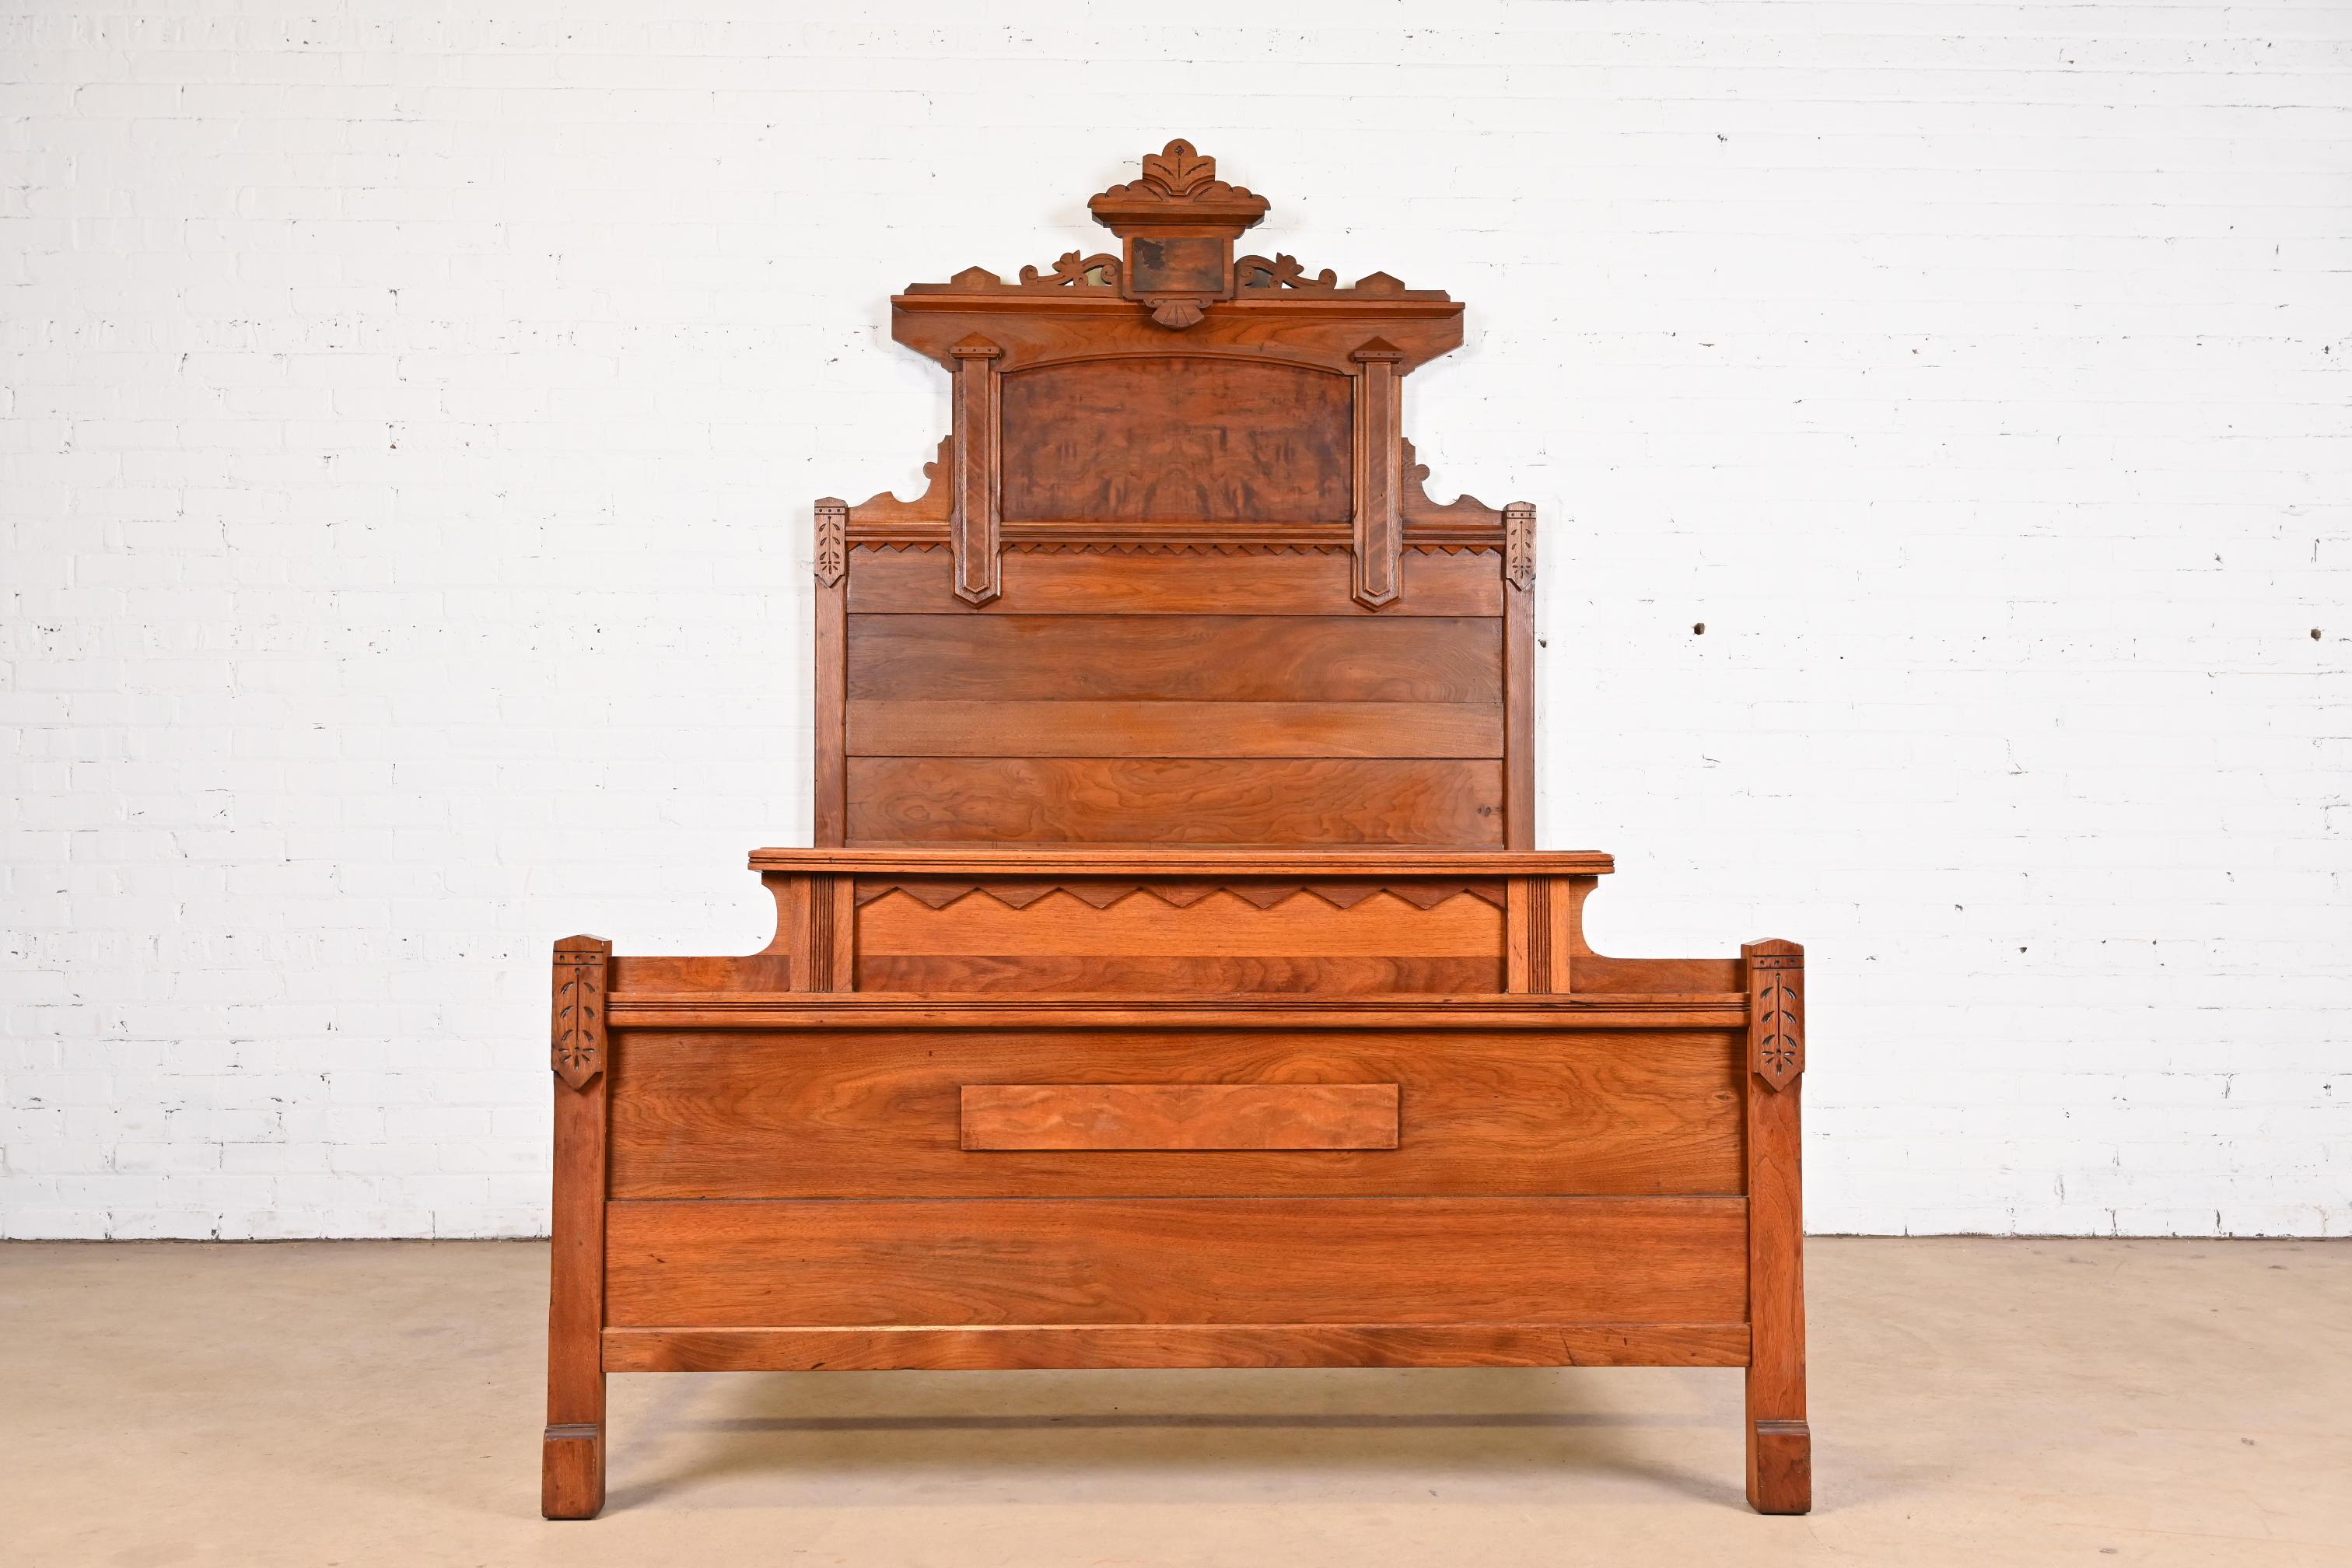 A gorgeous monumental antique Eastlake Victorian full size bed frame

In the manner of Herter Brothers

USA, Circa 1880s

Carved solid walnut, with burled walnut panels.

Measures: 57.25